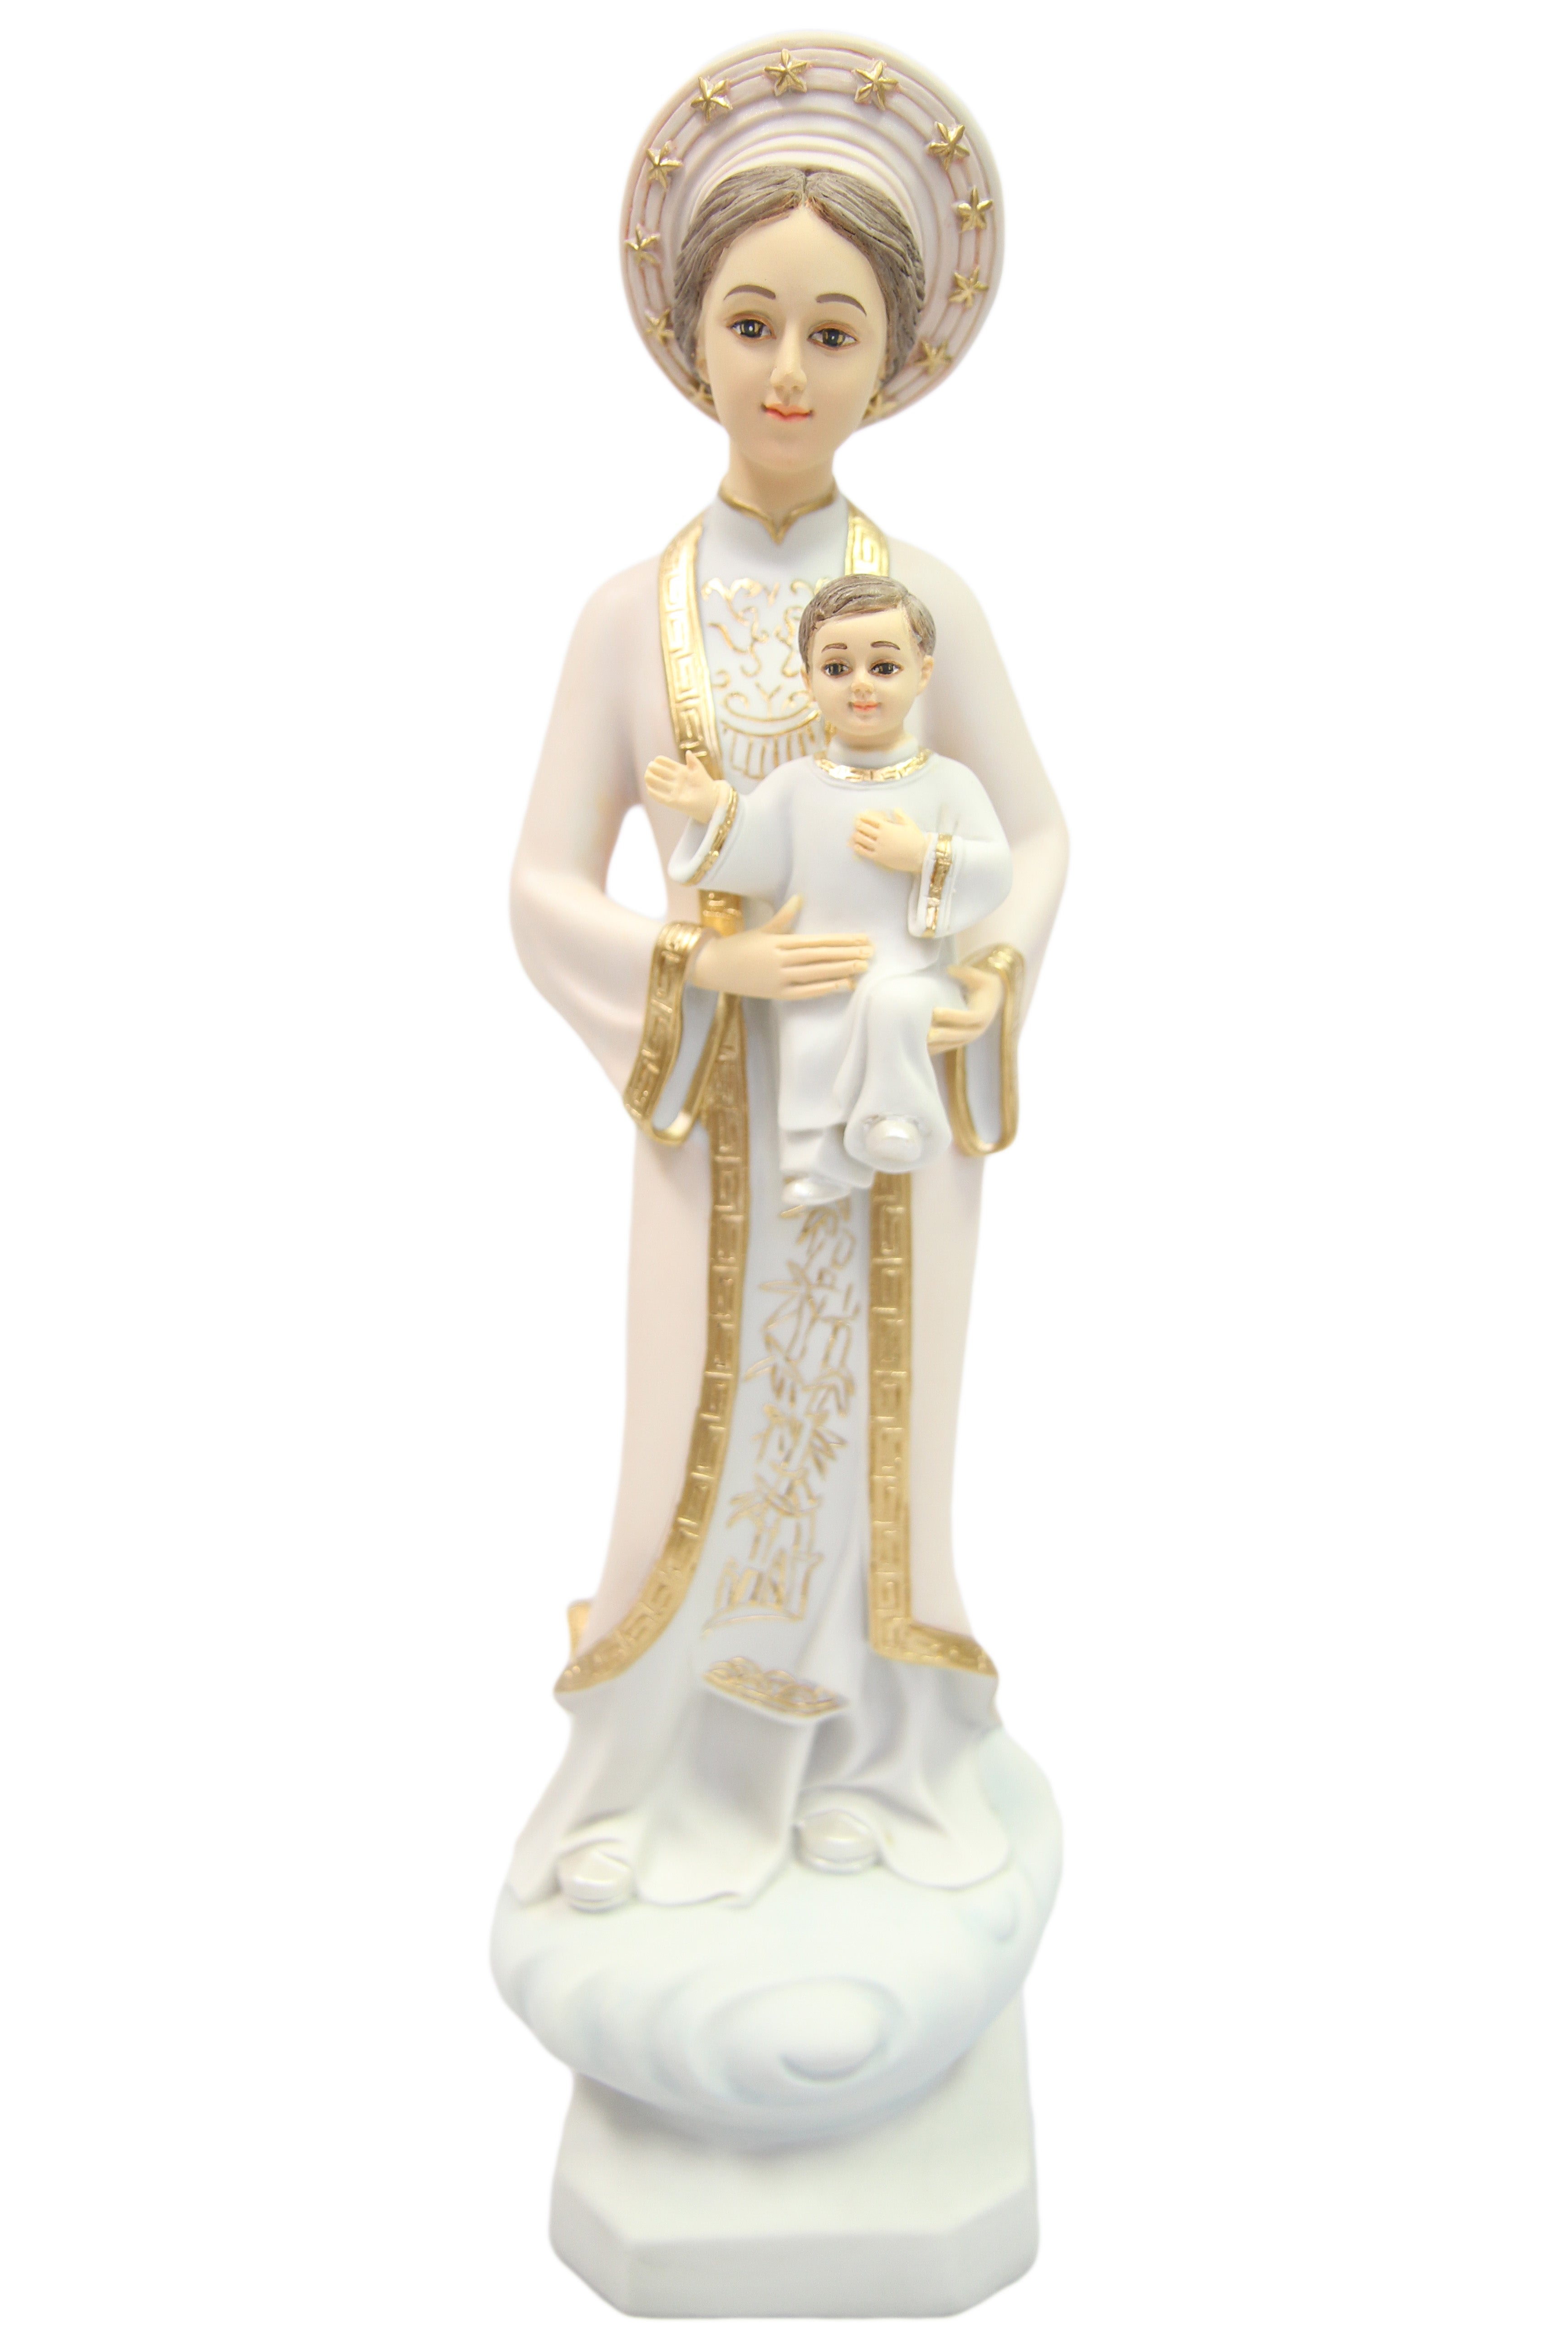 16" Our Lady of La Vang Virgin Mary Blessed Mother Catholic Religious Statue Figurine Vittoria Collection